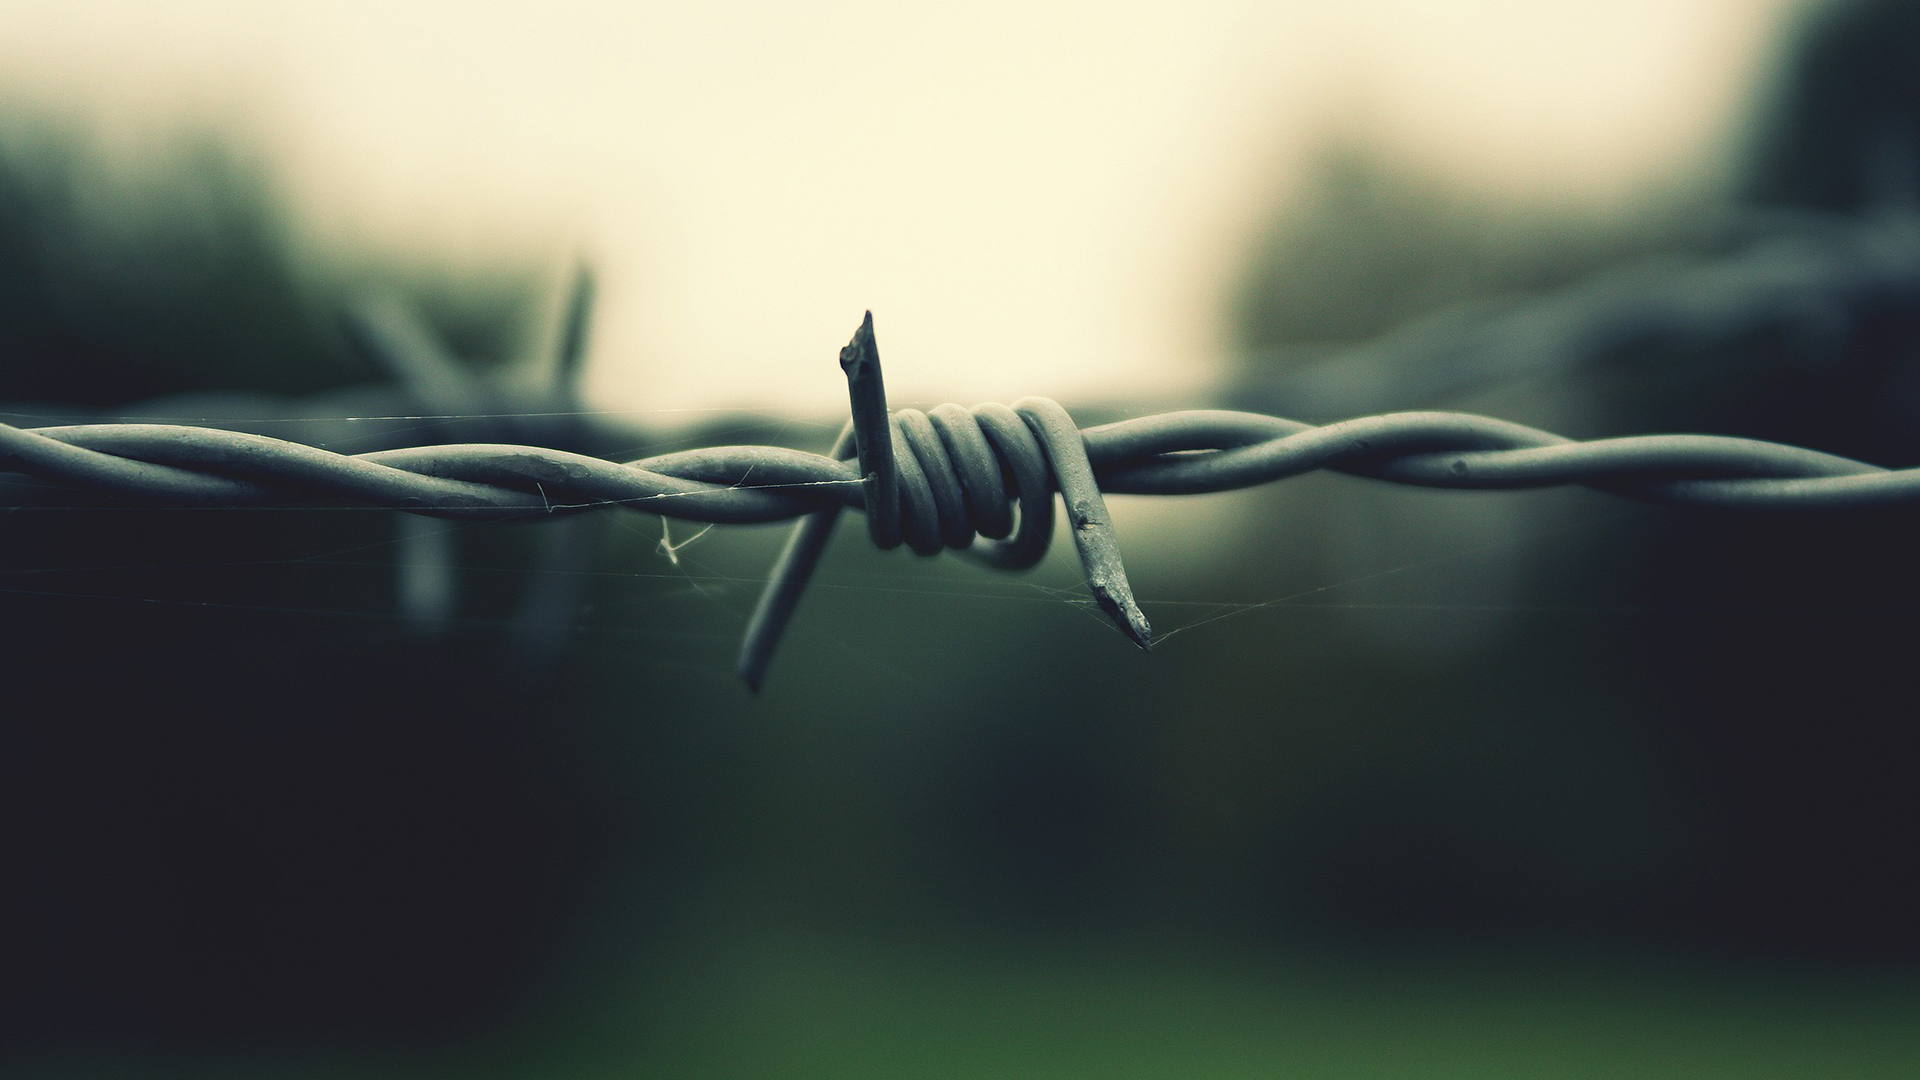 Download the Barbed Wire Wallpaper, Barbed Wire iPhone Wallpaper ...